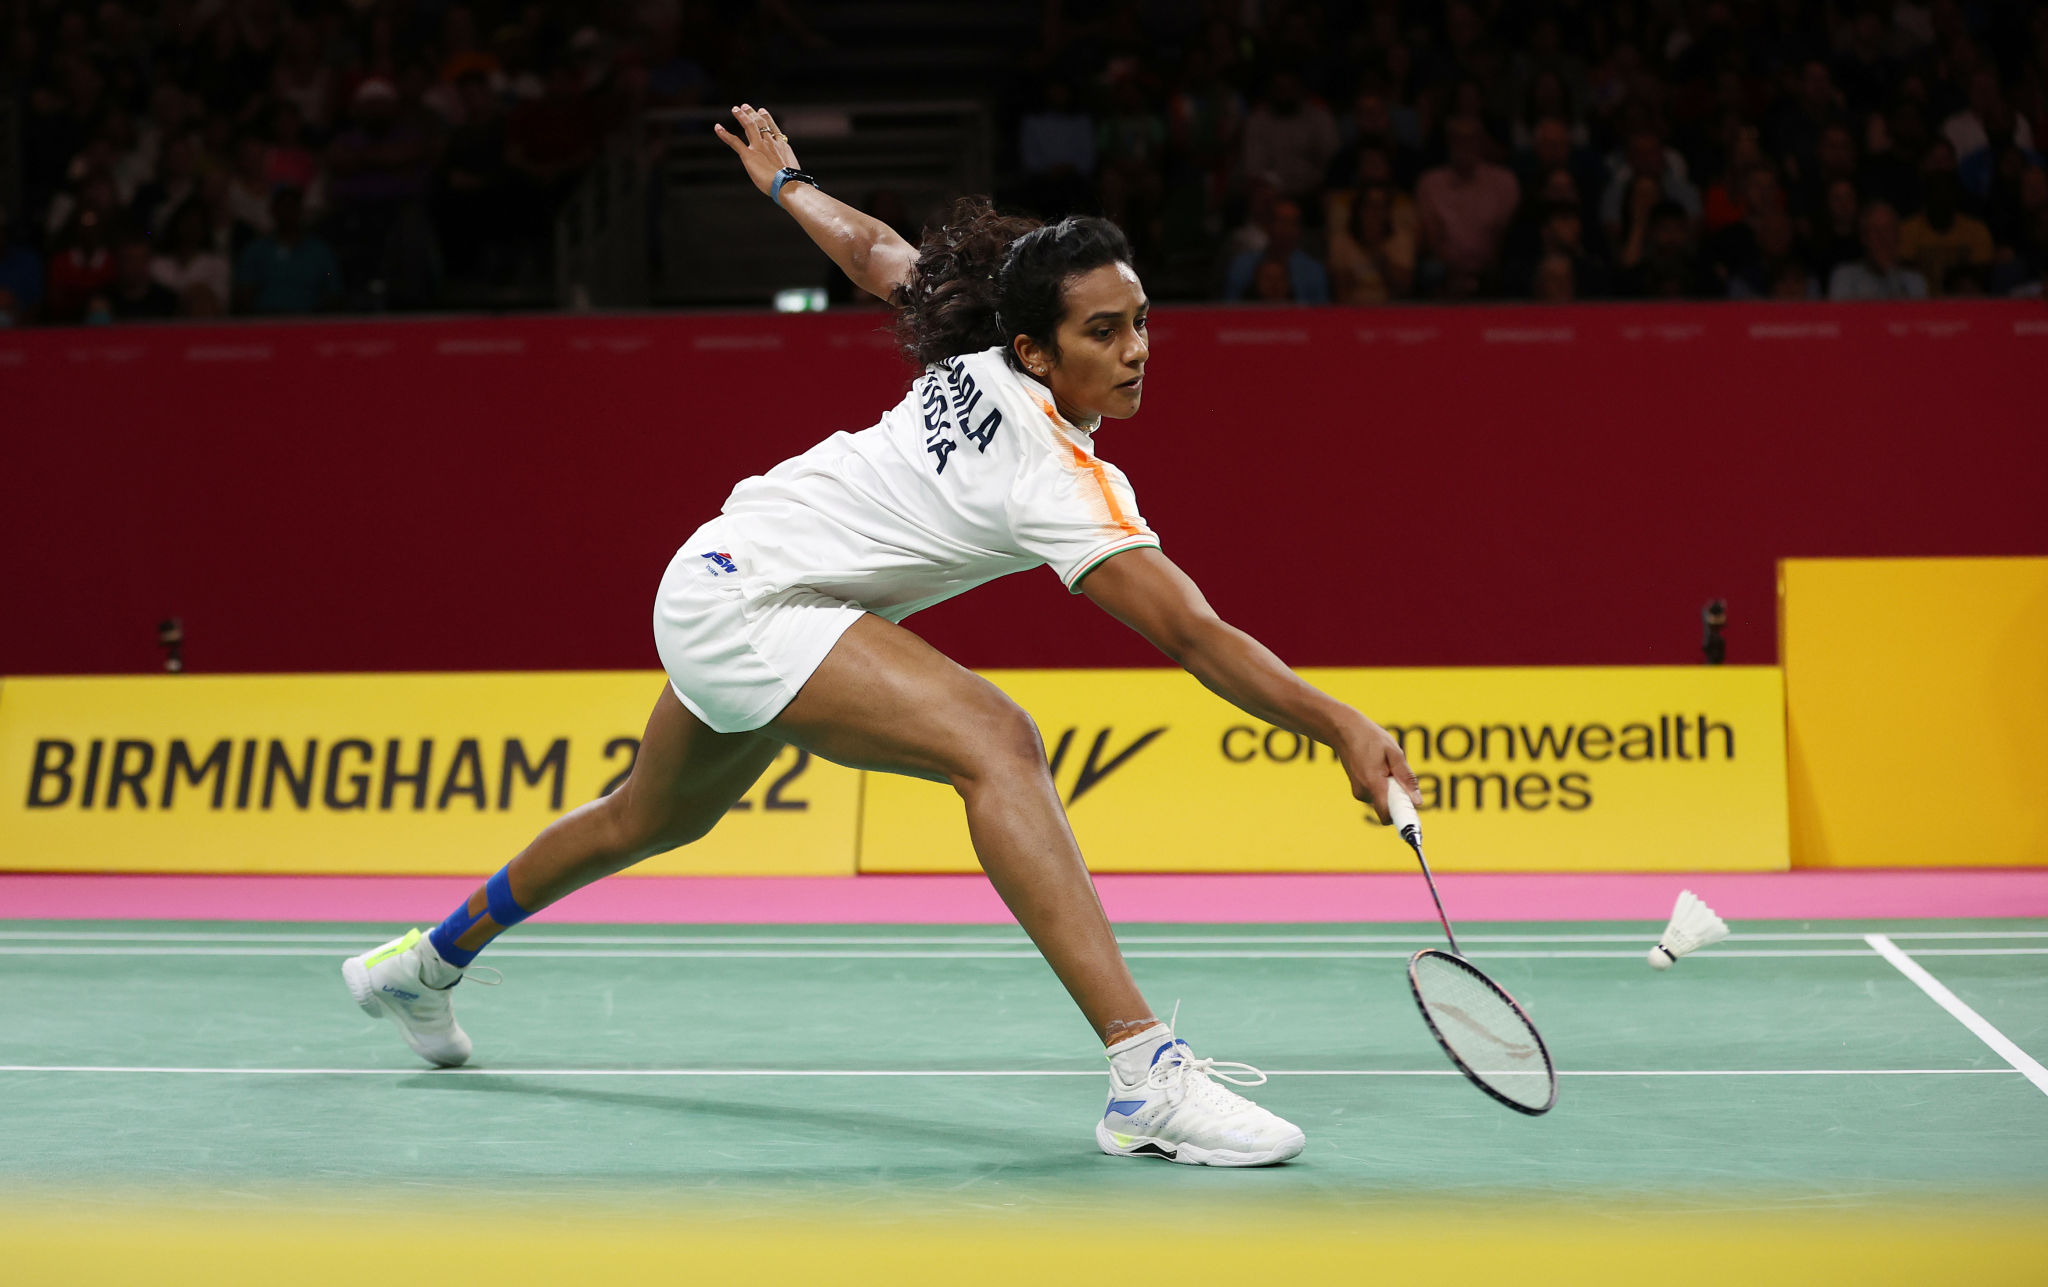 India Open Badminton LIVE: Everything you want to know about India Open Badminton 2023 Draws, Schedule, Prize Money, Indian players in Action and LIVE Streaming details: Follow LIVE updates